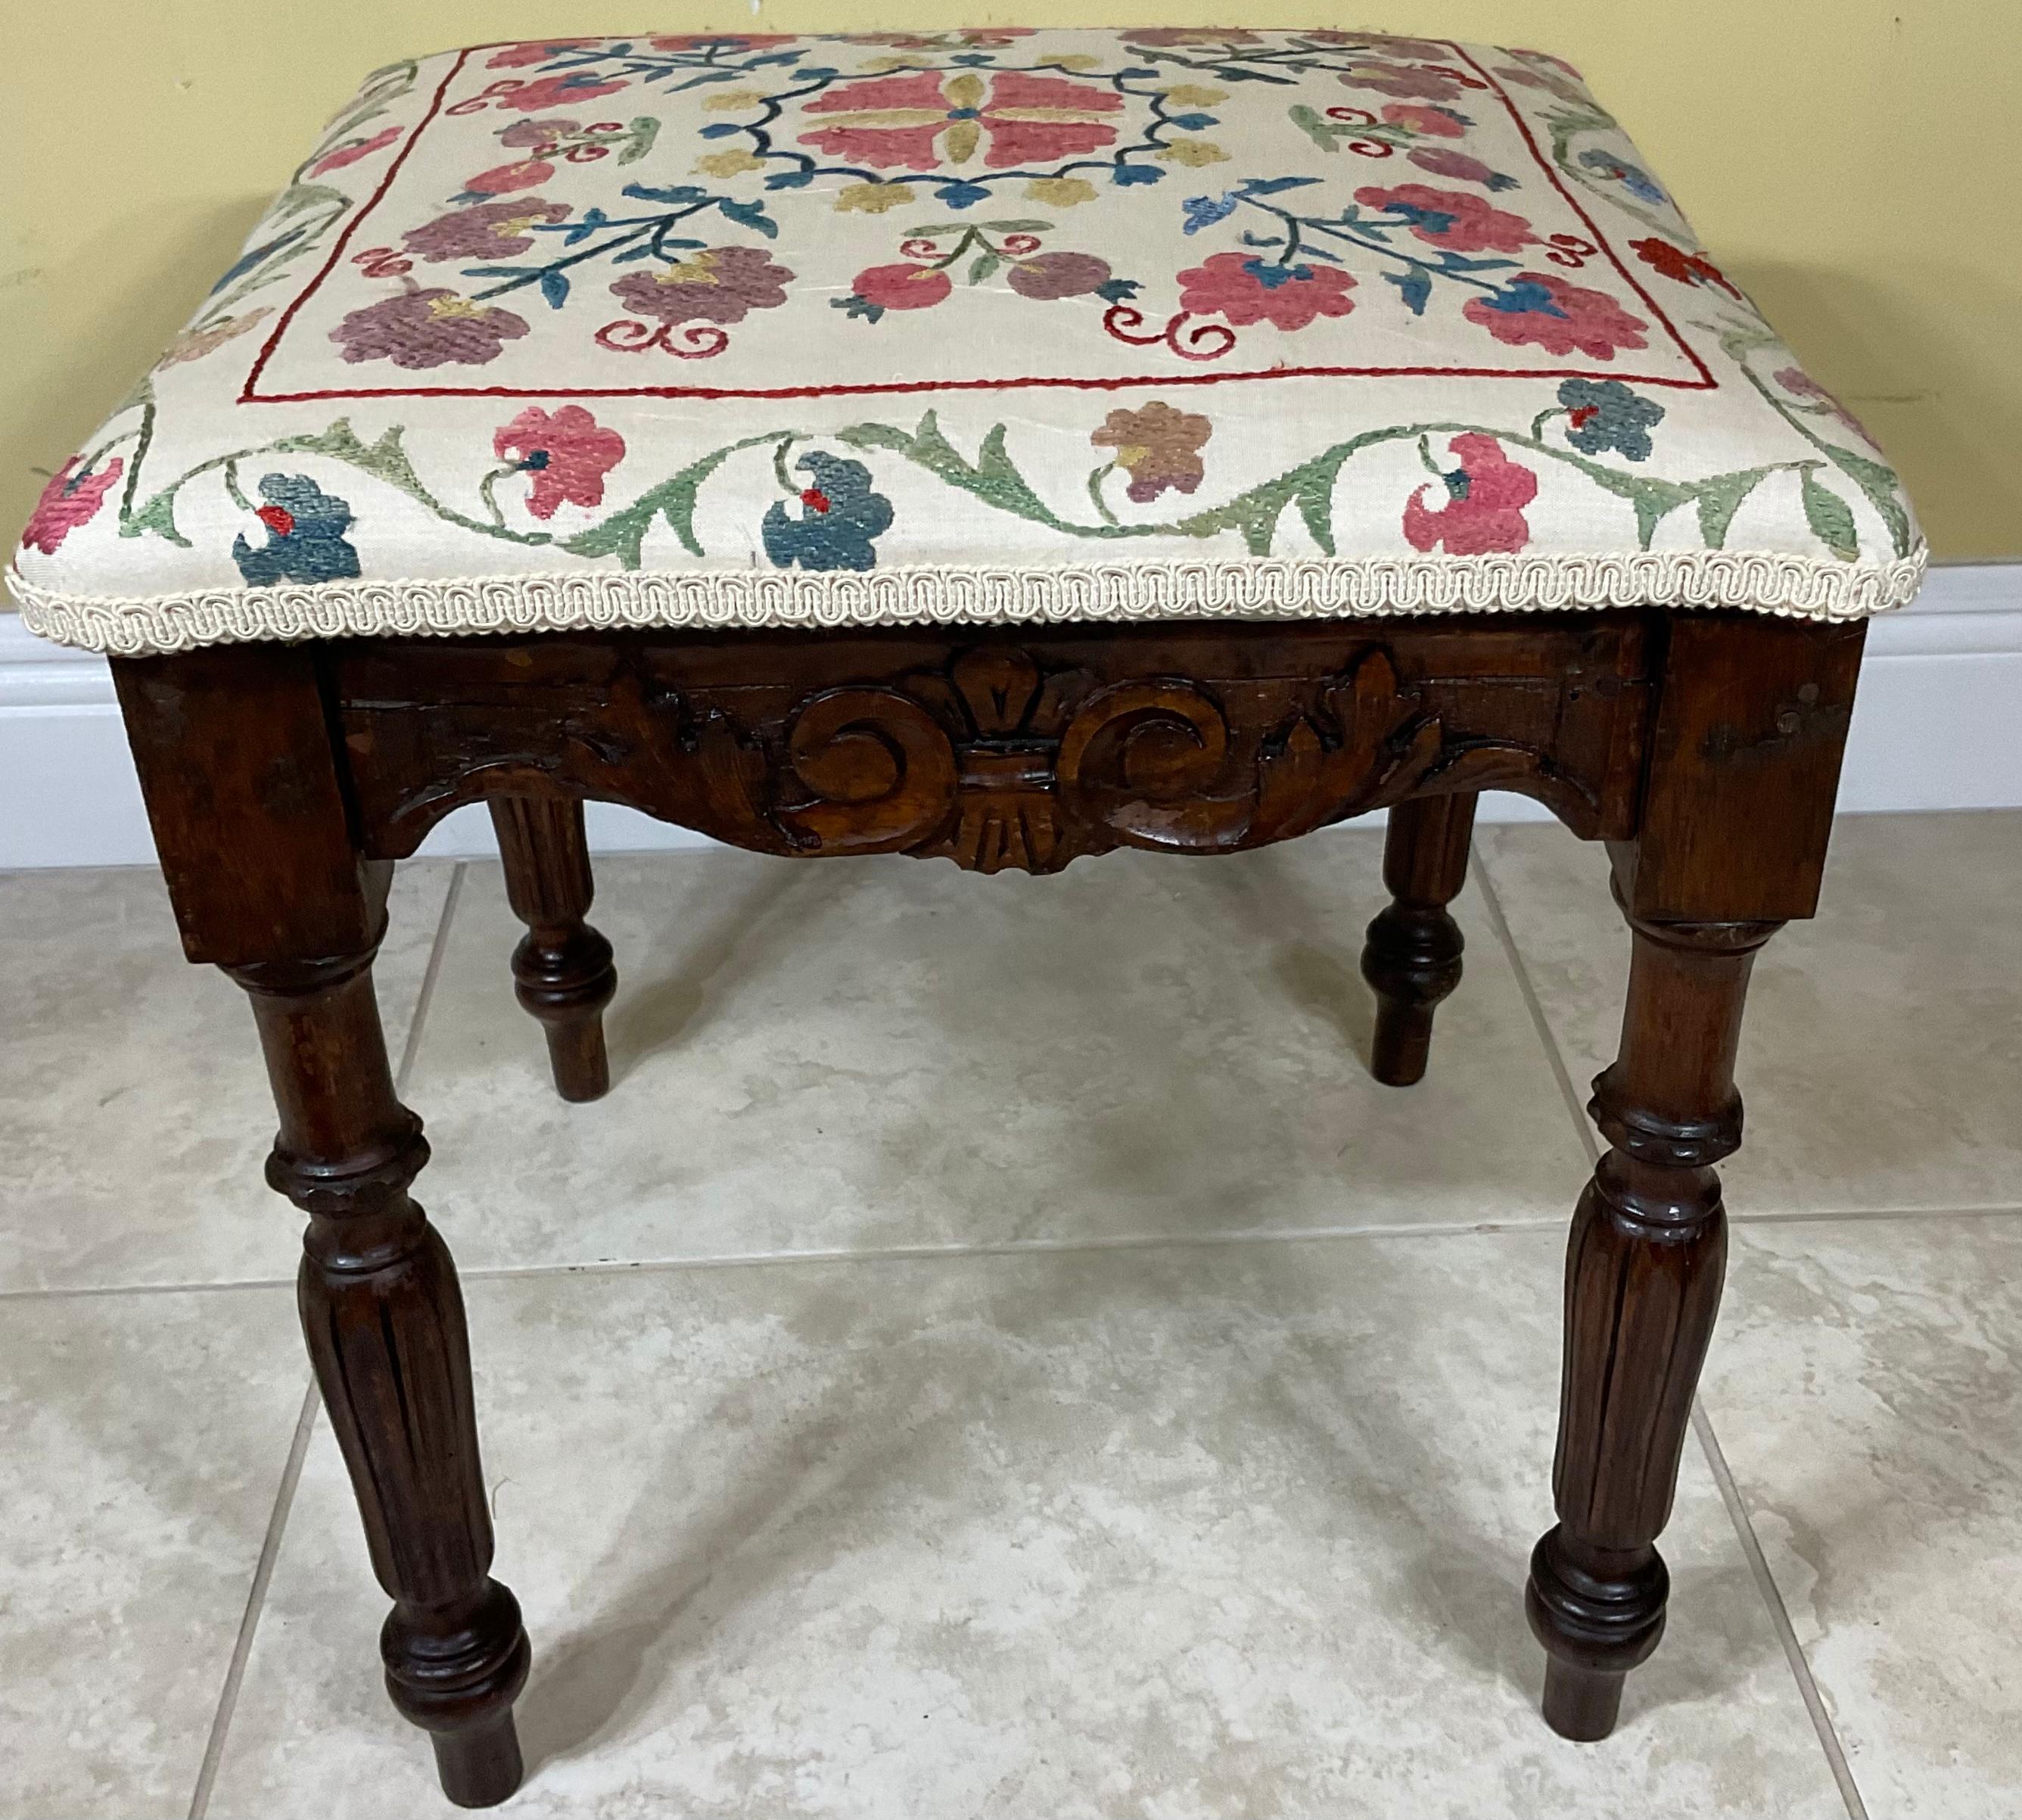 Elegant antique hand carved wood stool upholstered with beautiful vintage hand embroidery Suzani textile, great decorative stool.

 